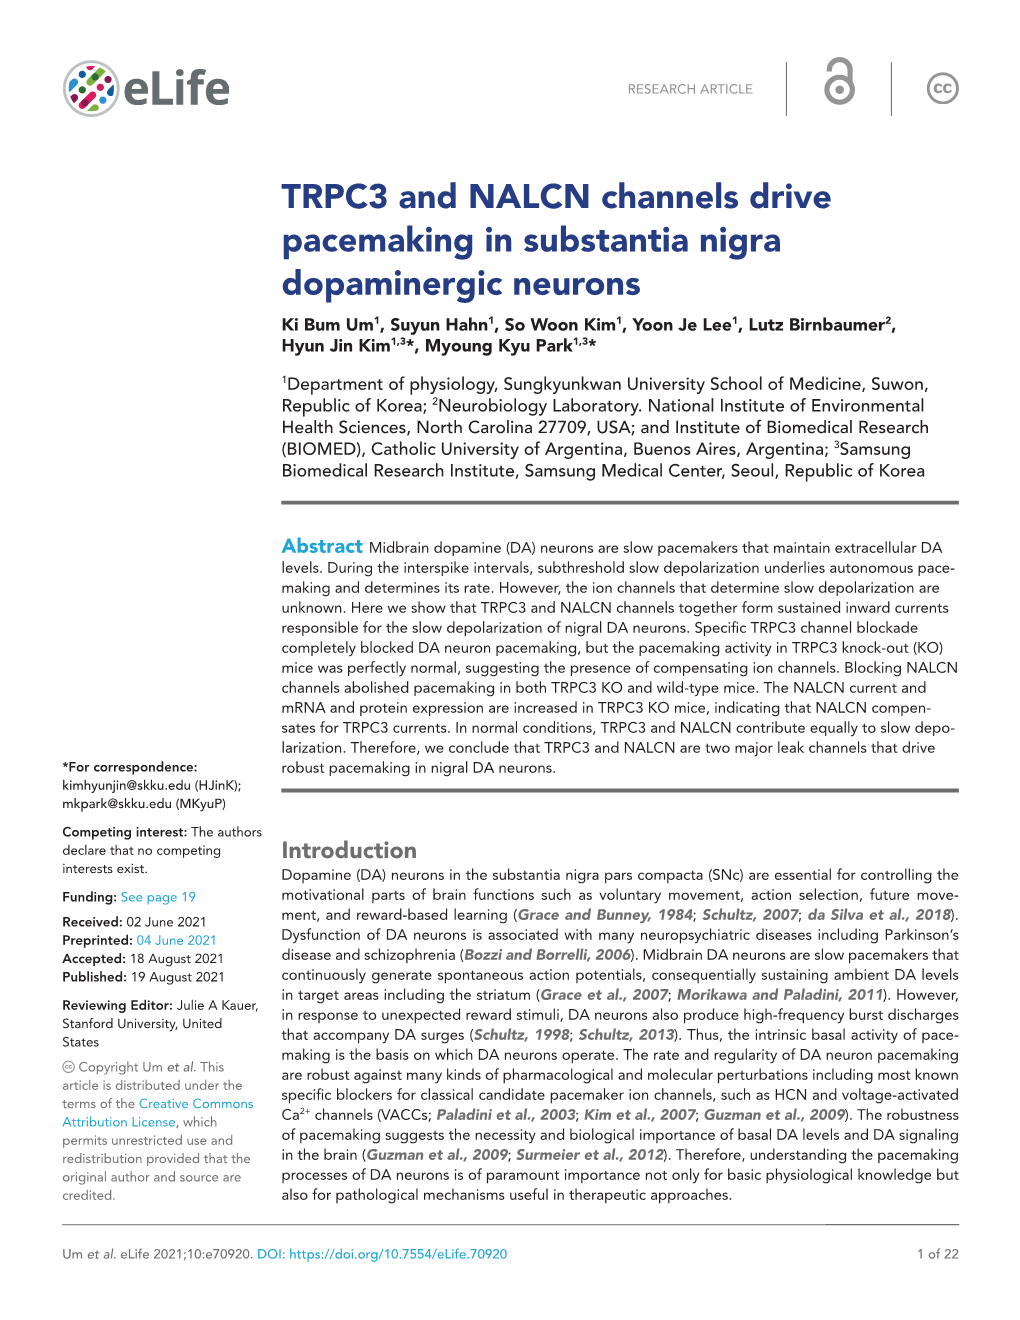 TRPC3 and NALCN Channels Drive Pacemaking in Substantia